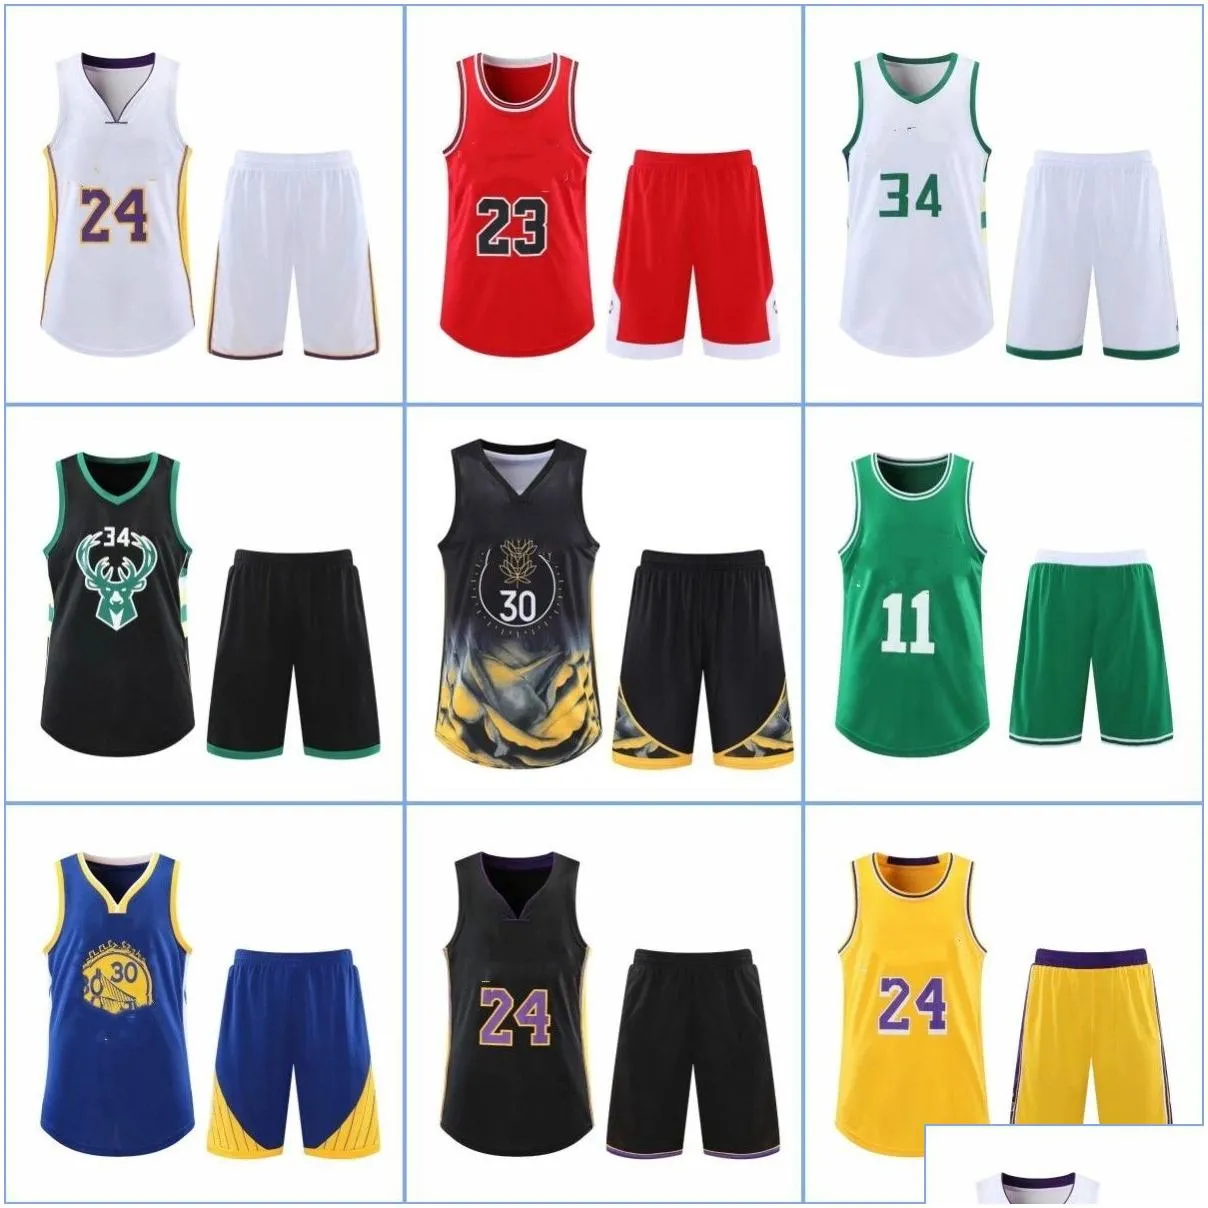 Outdoor T-Shirts Tshirts Custom Basketball Jersey Set For Men Kids Club College Team Professional Training Uniforms Suit Quick Dry Spo Dhcsl